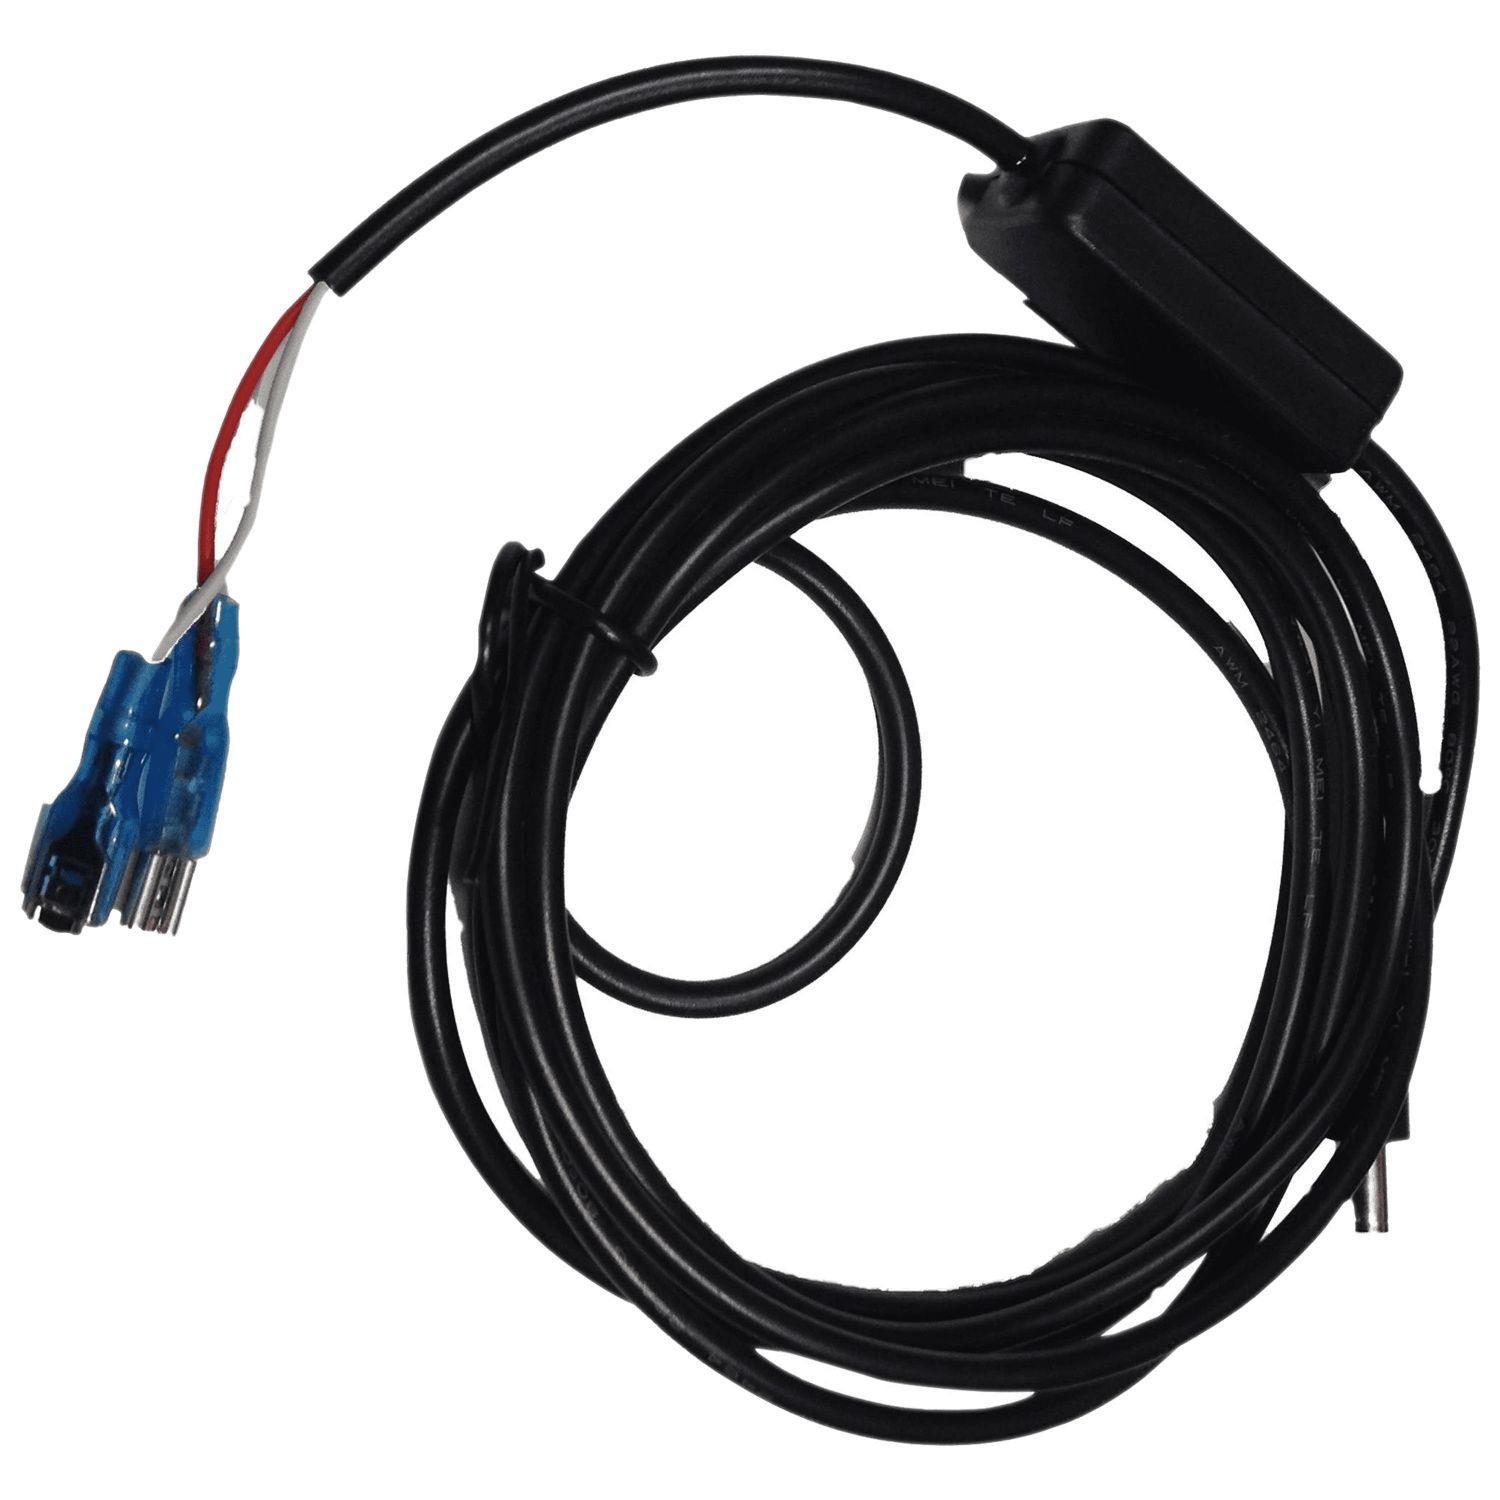 Covert Convertor Cable